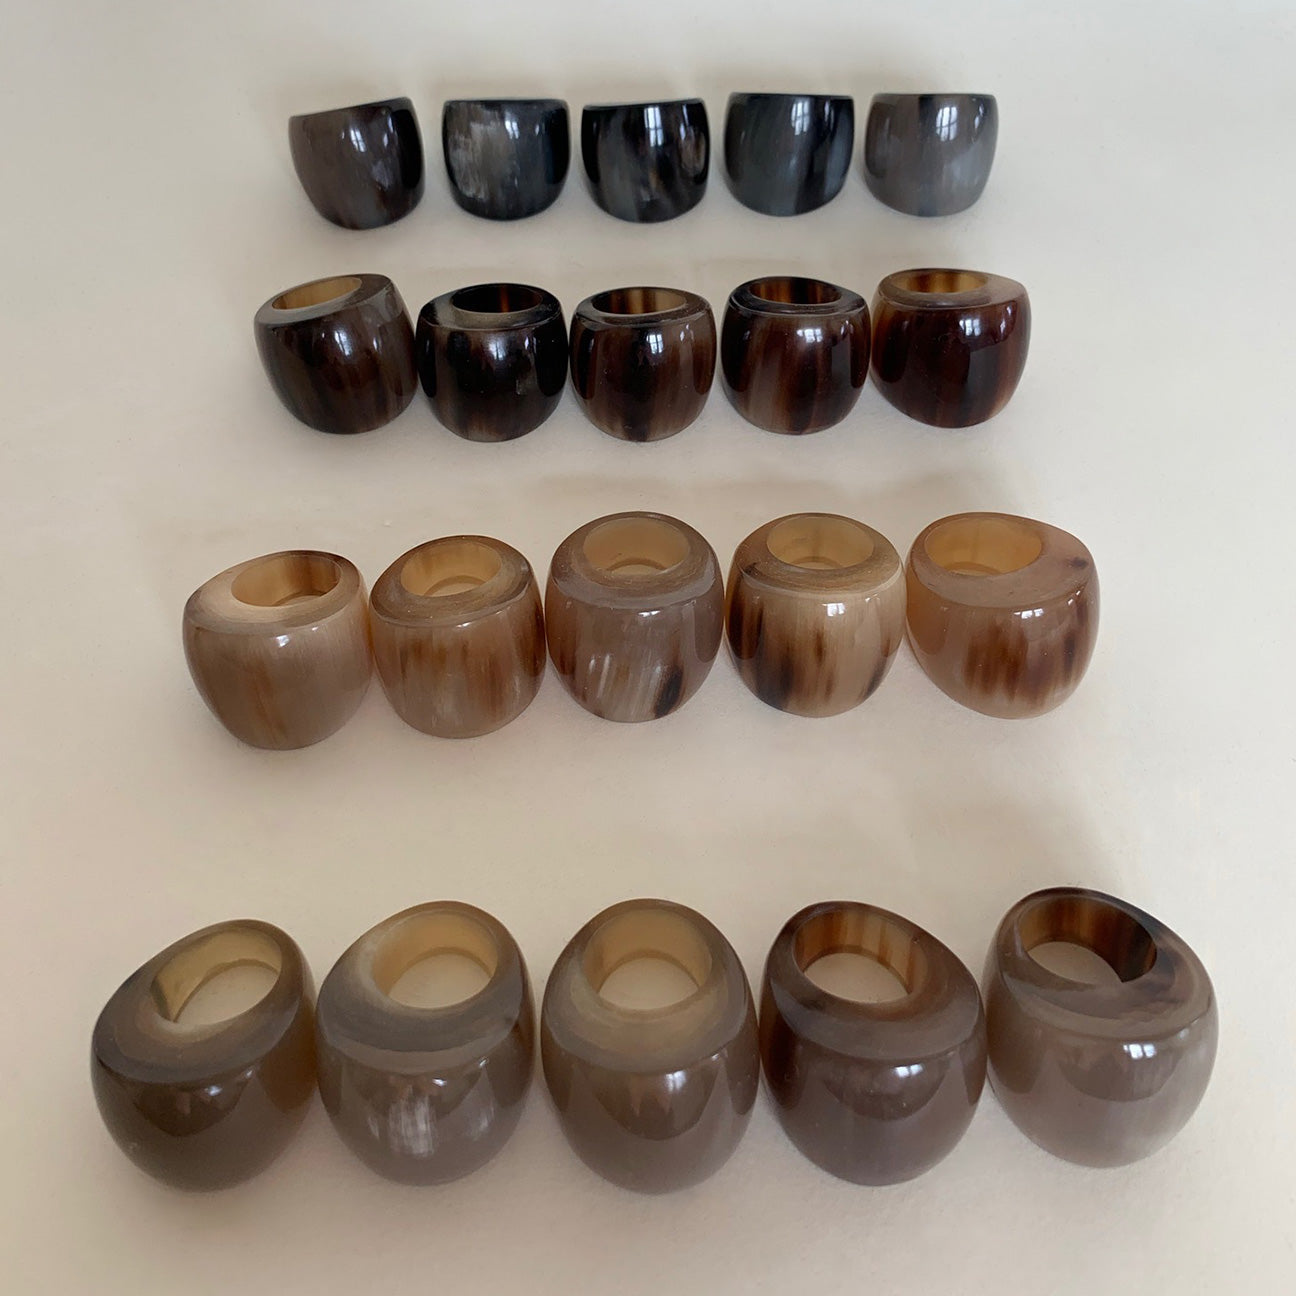 Lineup of M+A NYC Horn Cocktail Rings showing from top to bottom row: Smoke, Tortoise, Milk Caramel and Fawn